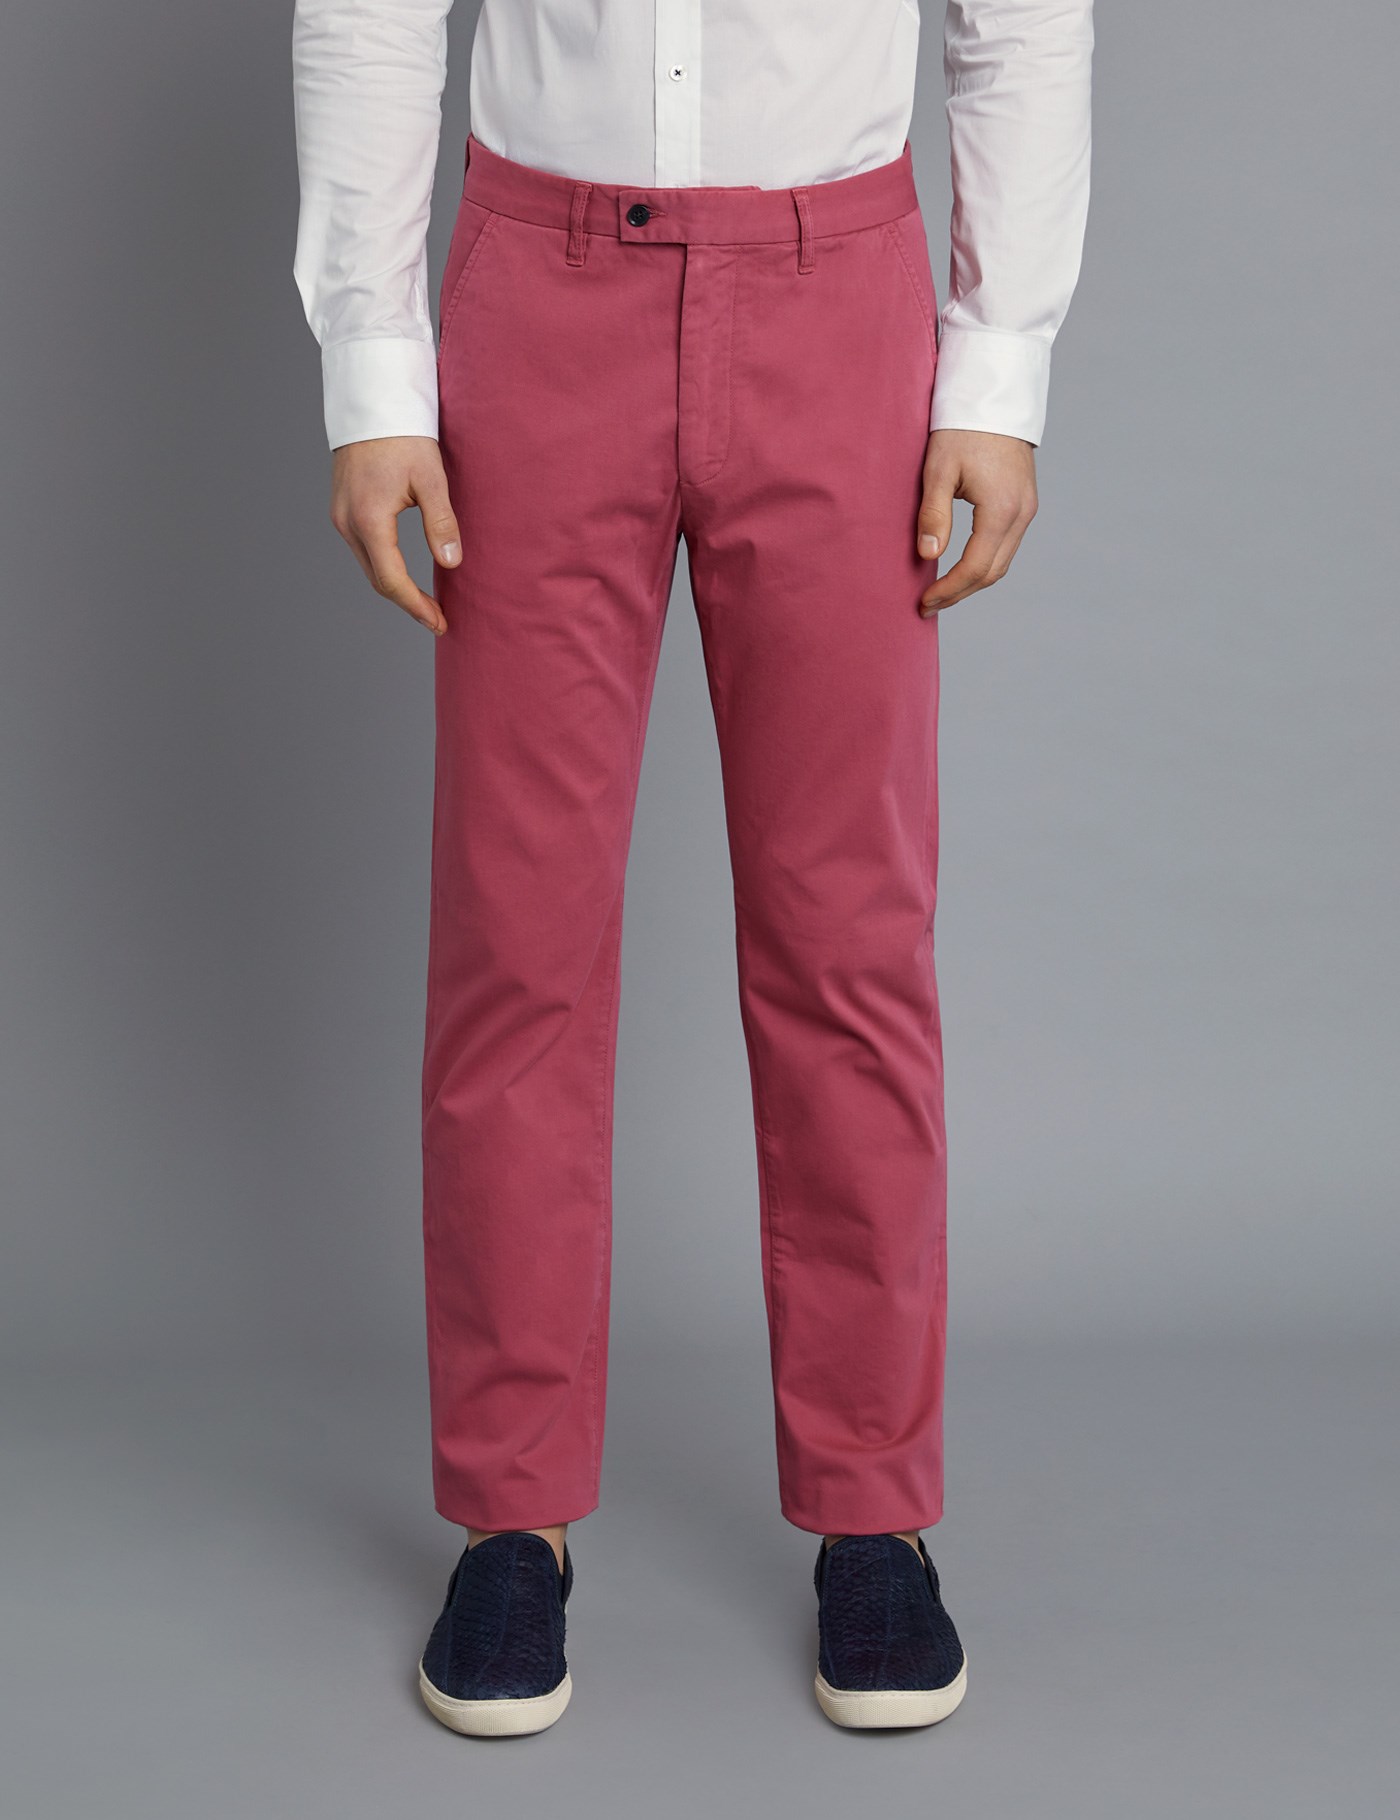 Men's Rose Garment Dye Classic Fit Chinos | Hawes & Curtis